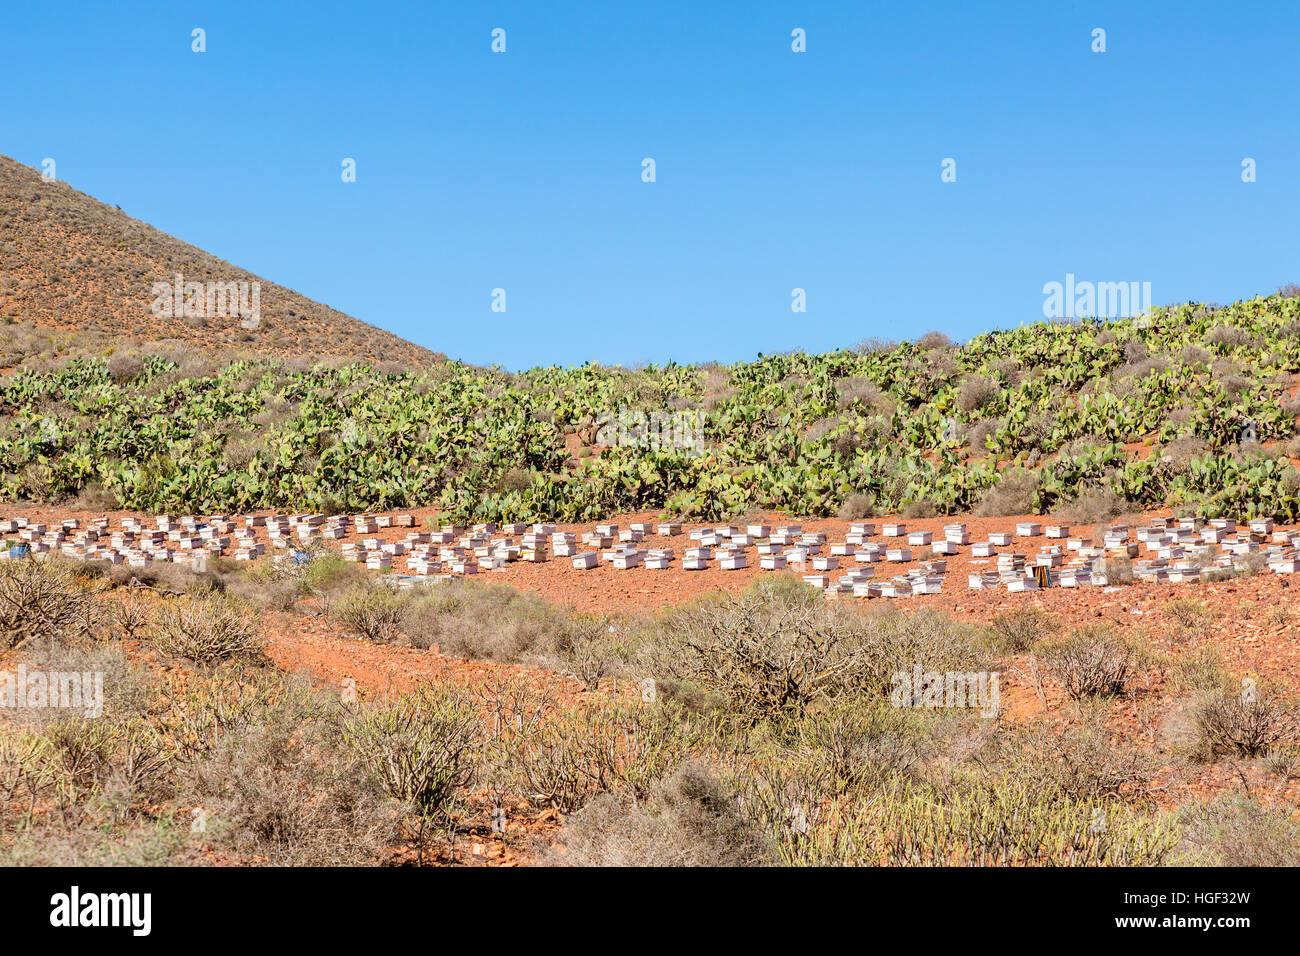 The effective combination of beekeeping and the cultivation of prickly pear over Sidi Ifni, Morocco Stock Photo